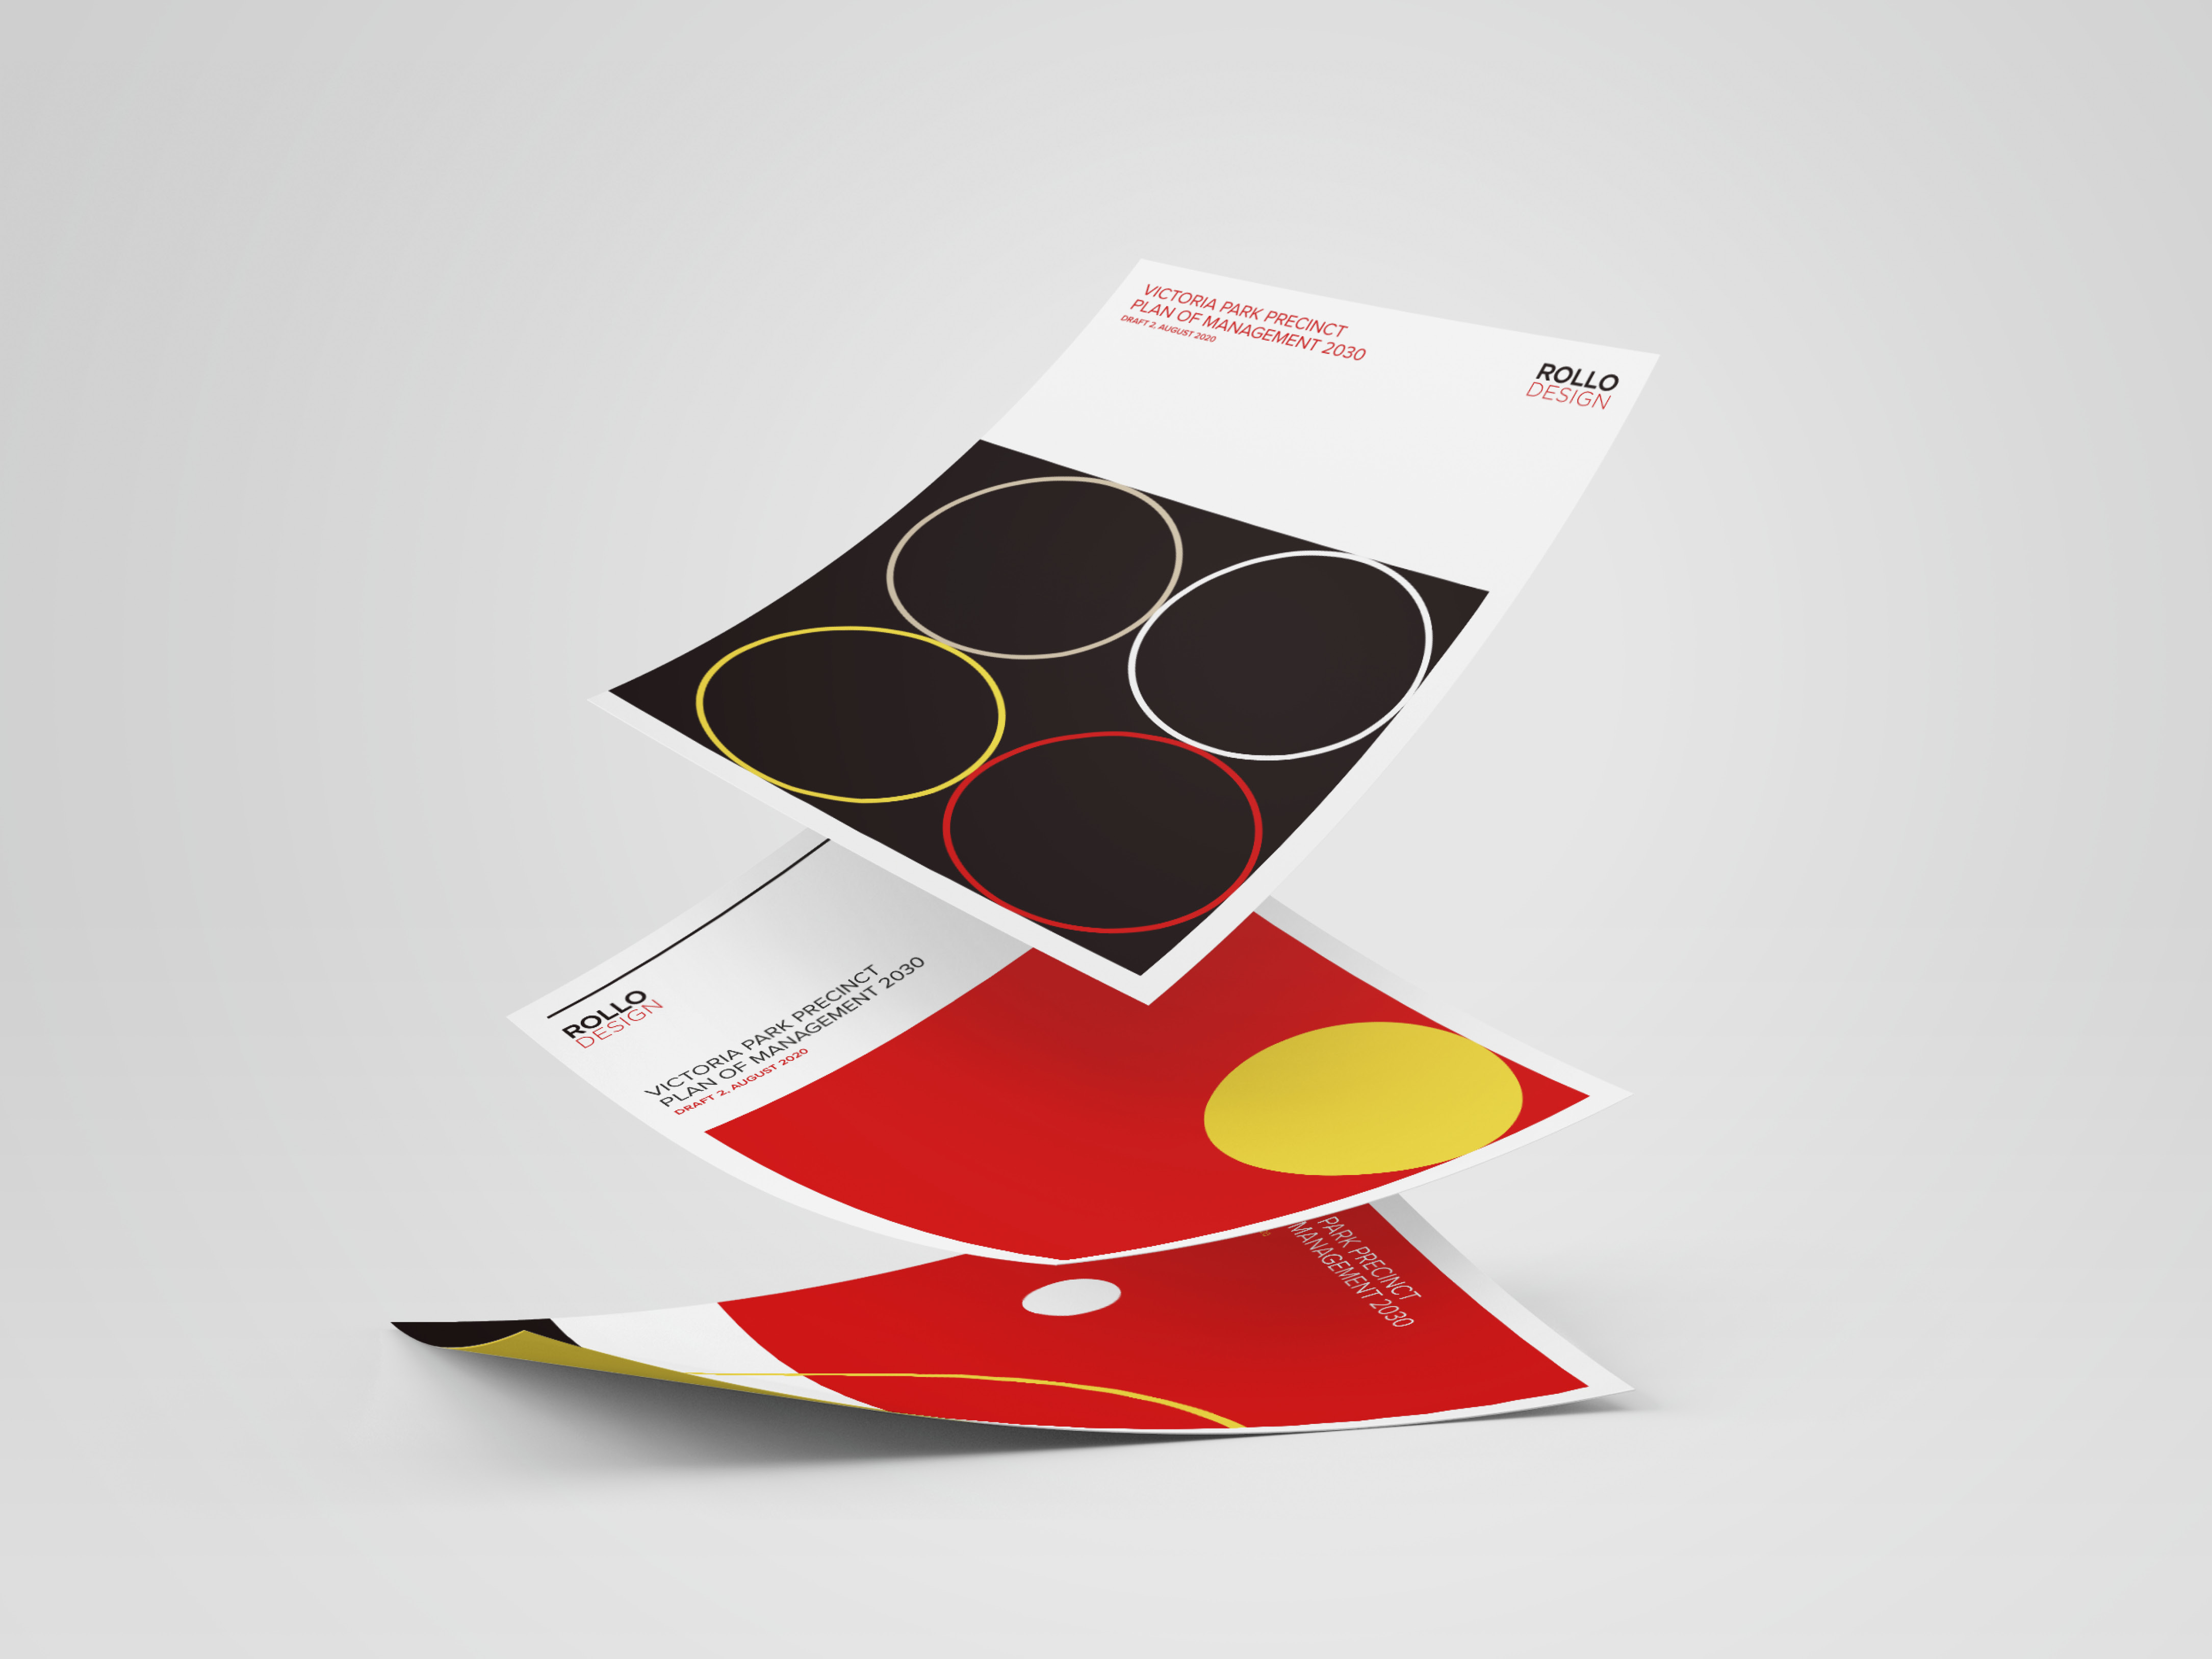 Abstract report covers for Rollo Design